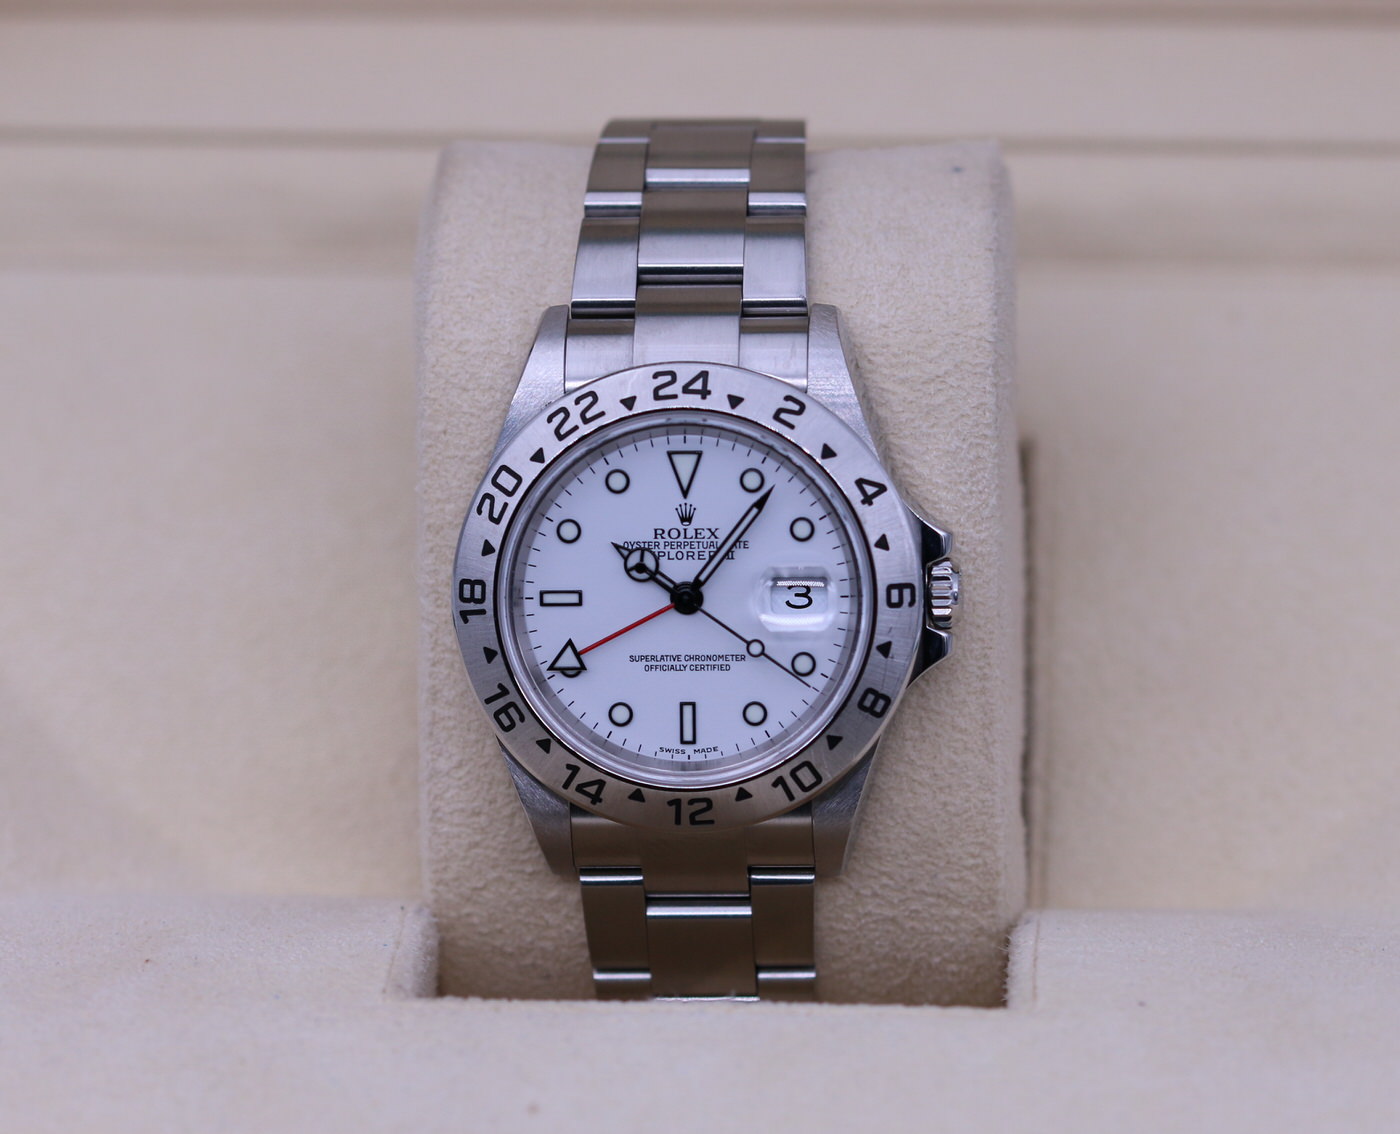 Rolex Explorer White Dial “Polar” 16570 – Serial – Box & Papers – Watch